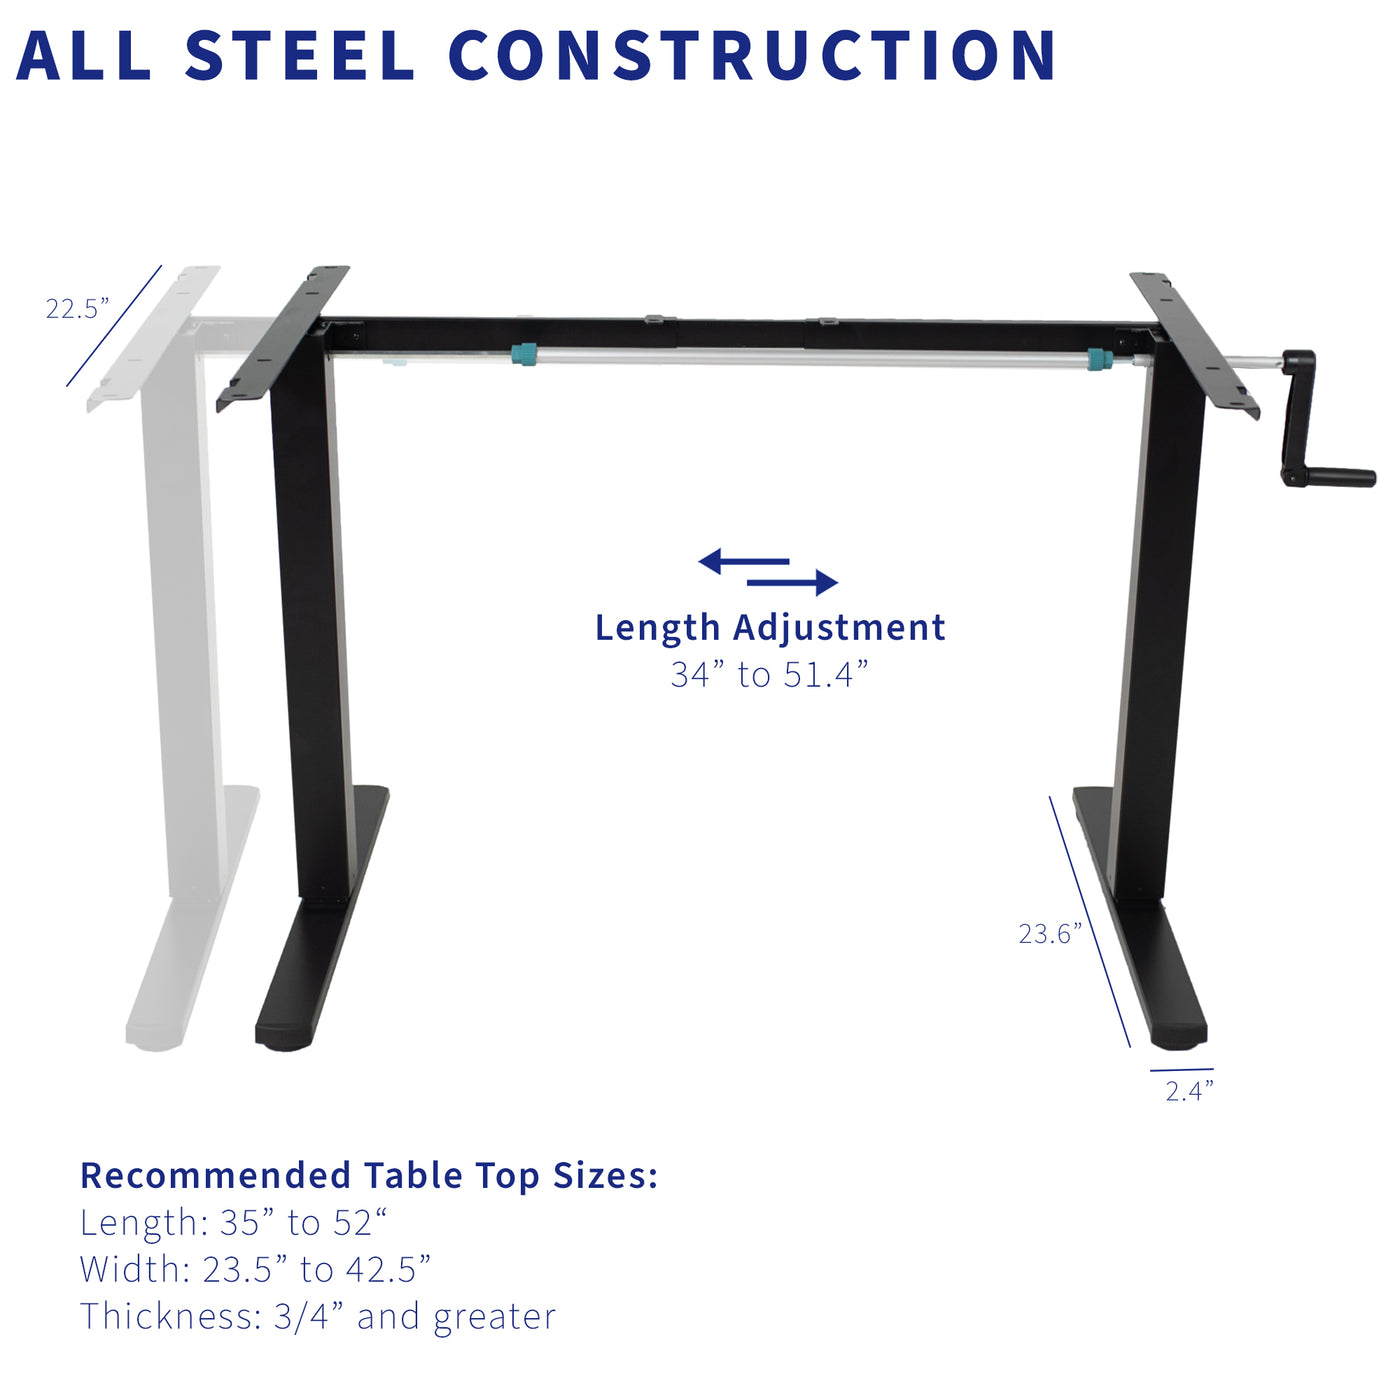 Desk frame with length adjustment to fit any compatible desktop of the recommended size.